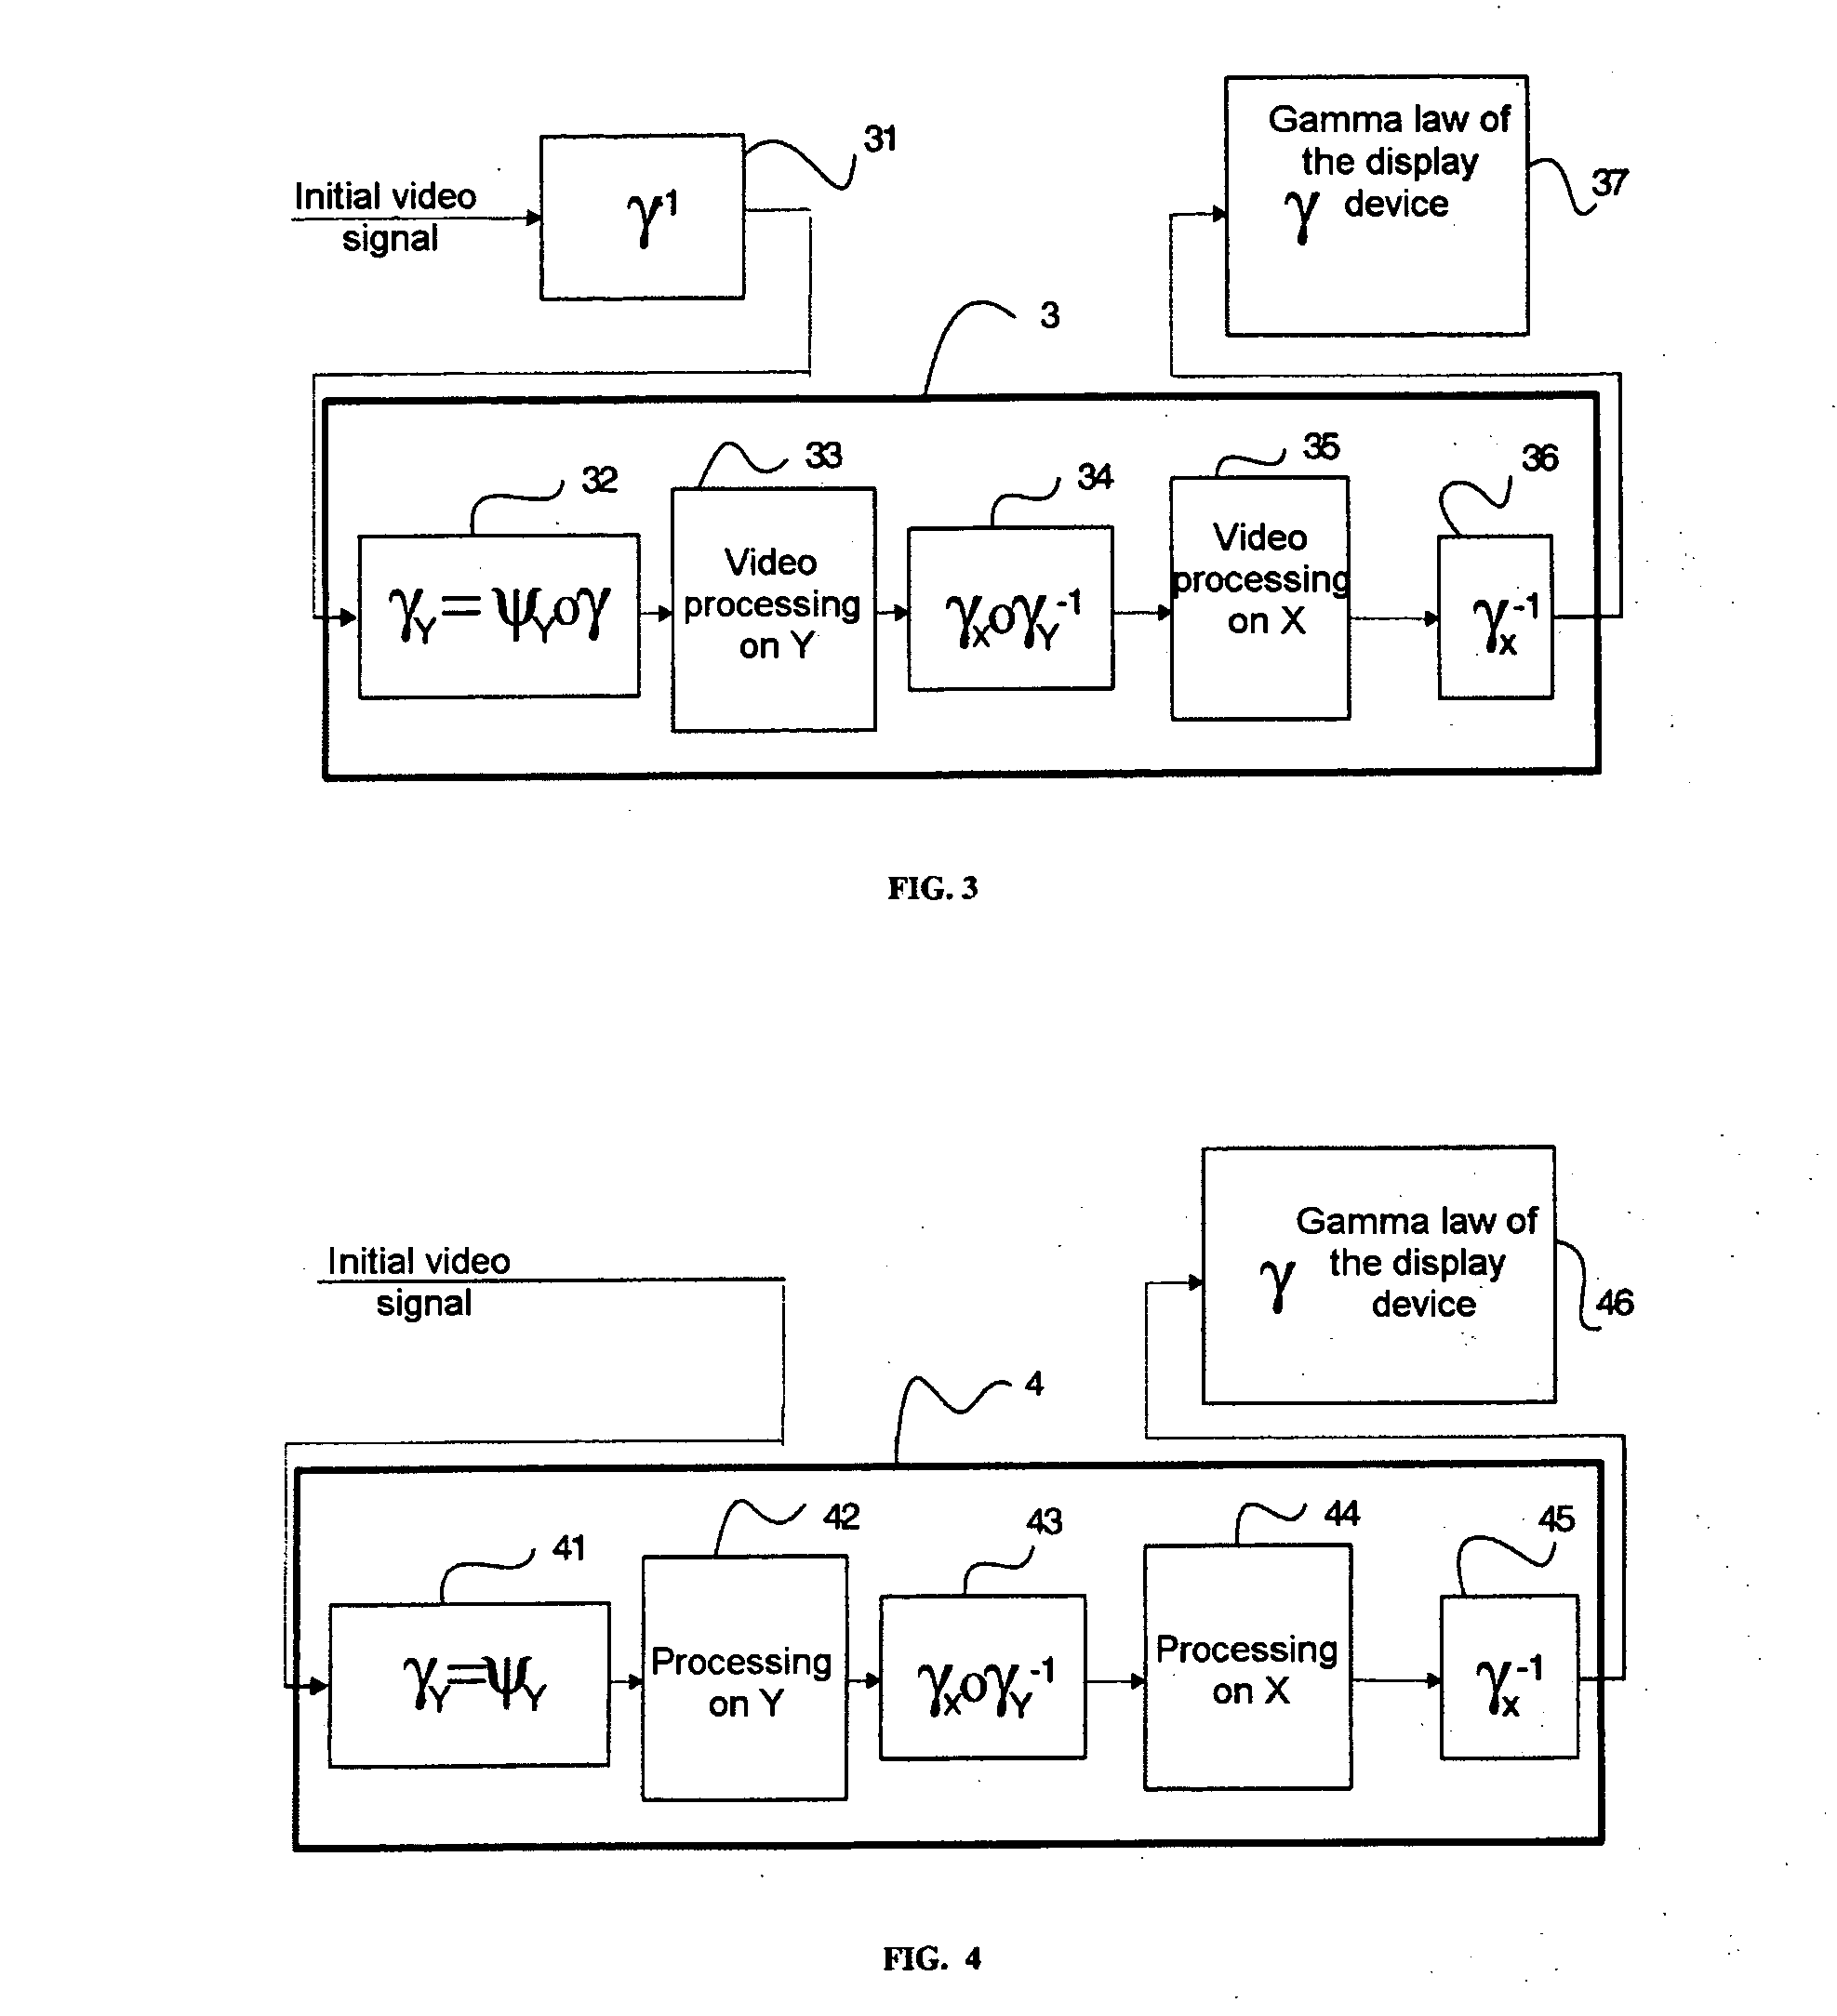 Method and device for processing a video signal aimed at compensating for the defects of display devices